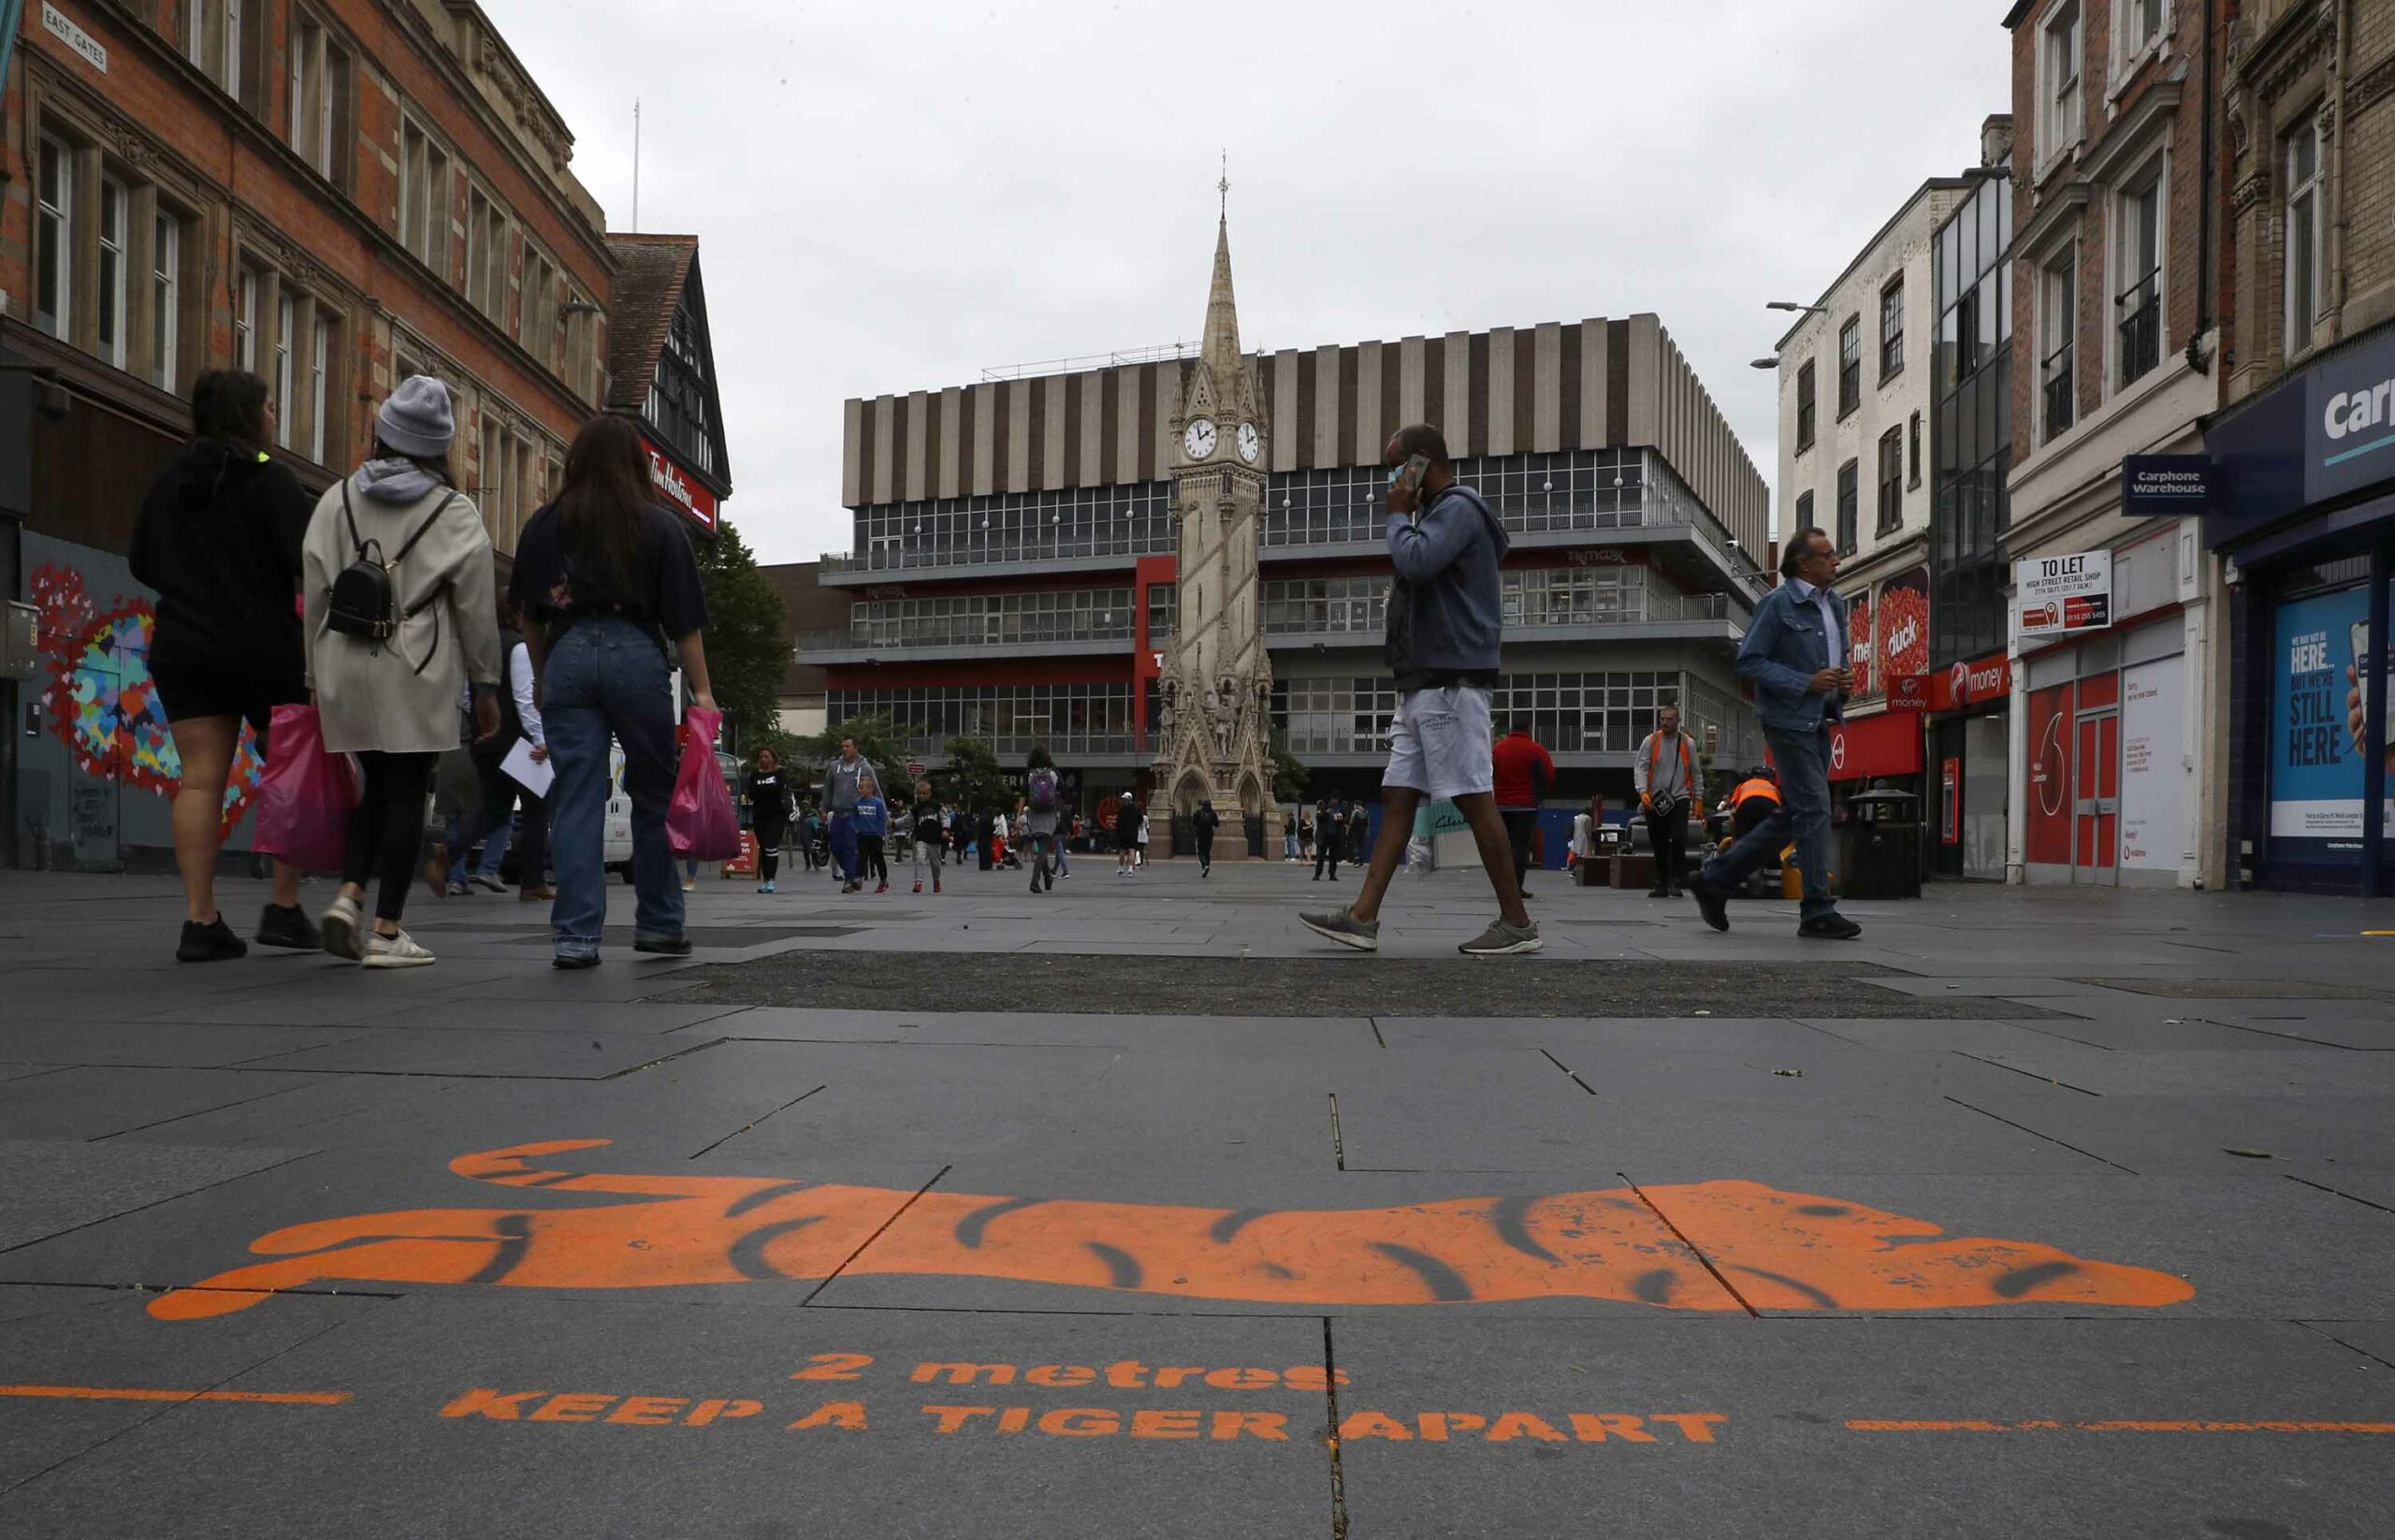 Shoppers walk past a social distancing message painted on the pavement in Leicester, England, on Monday, June 29.